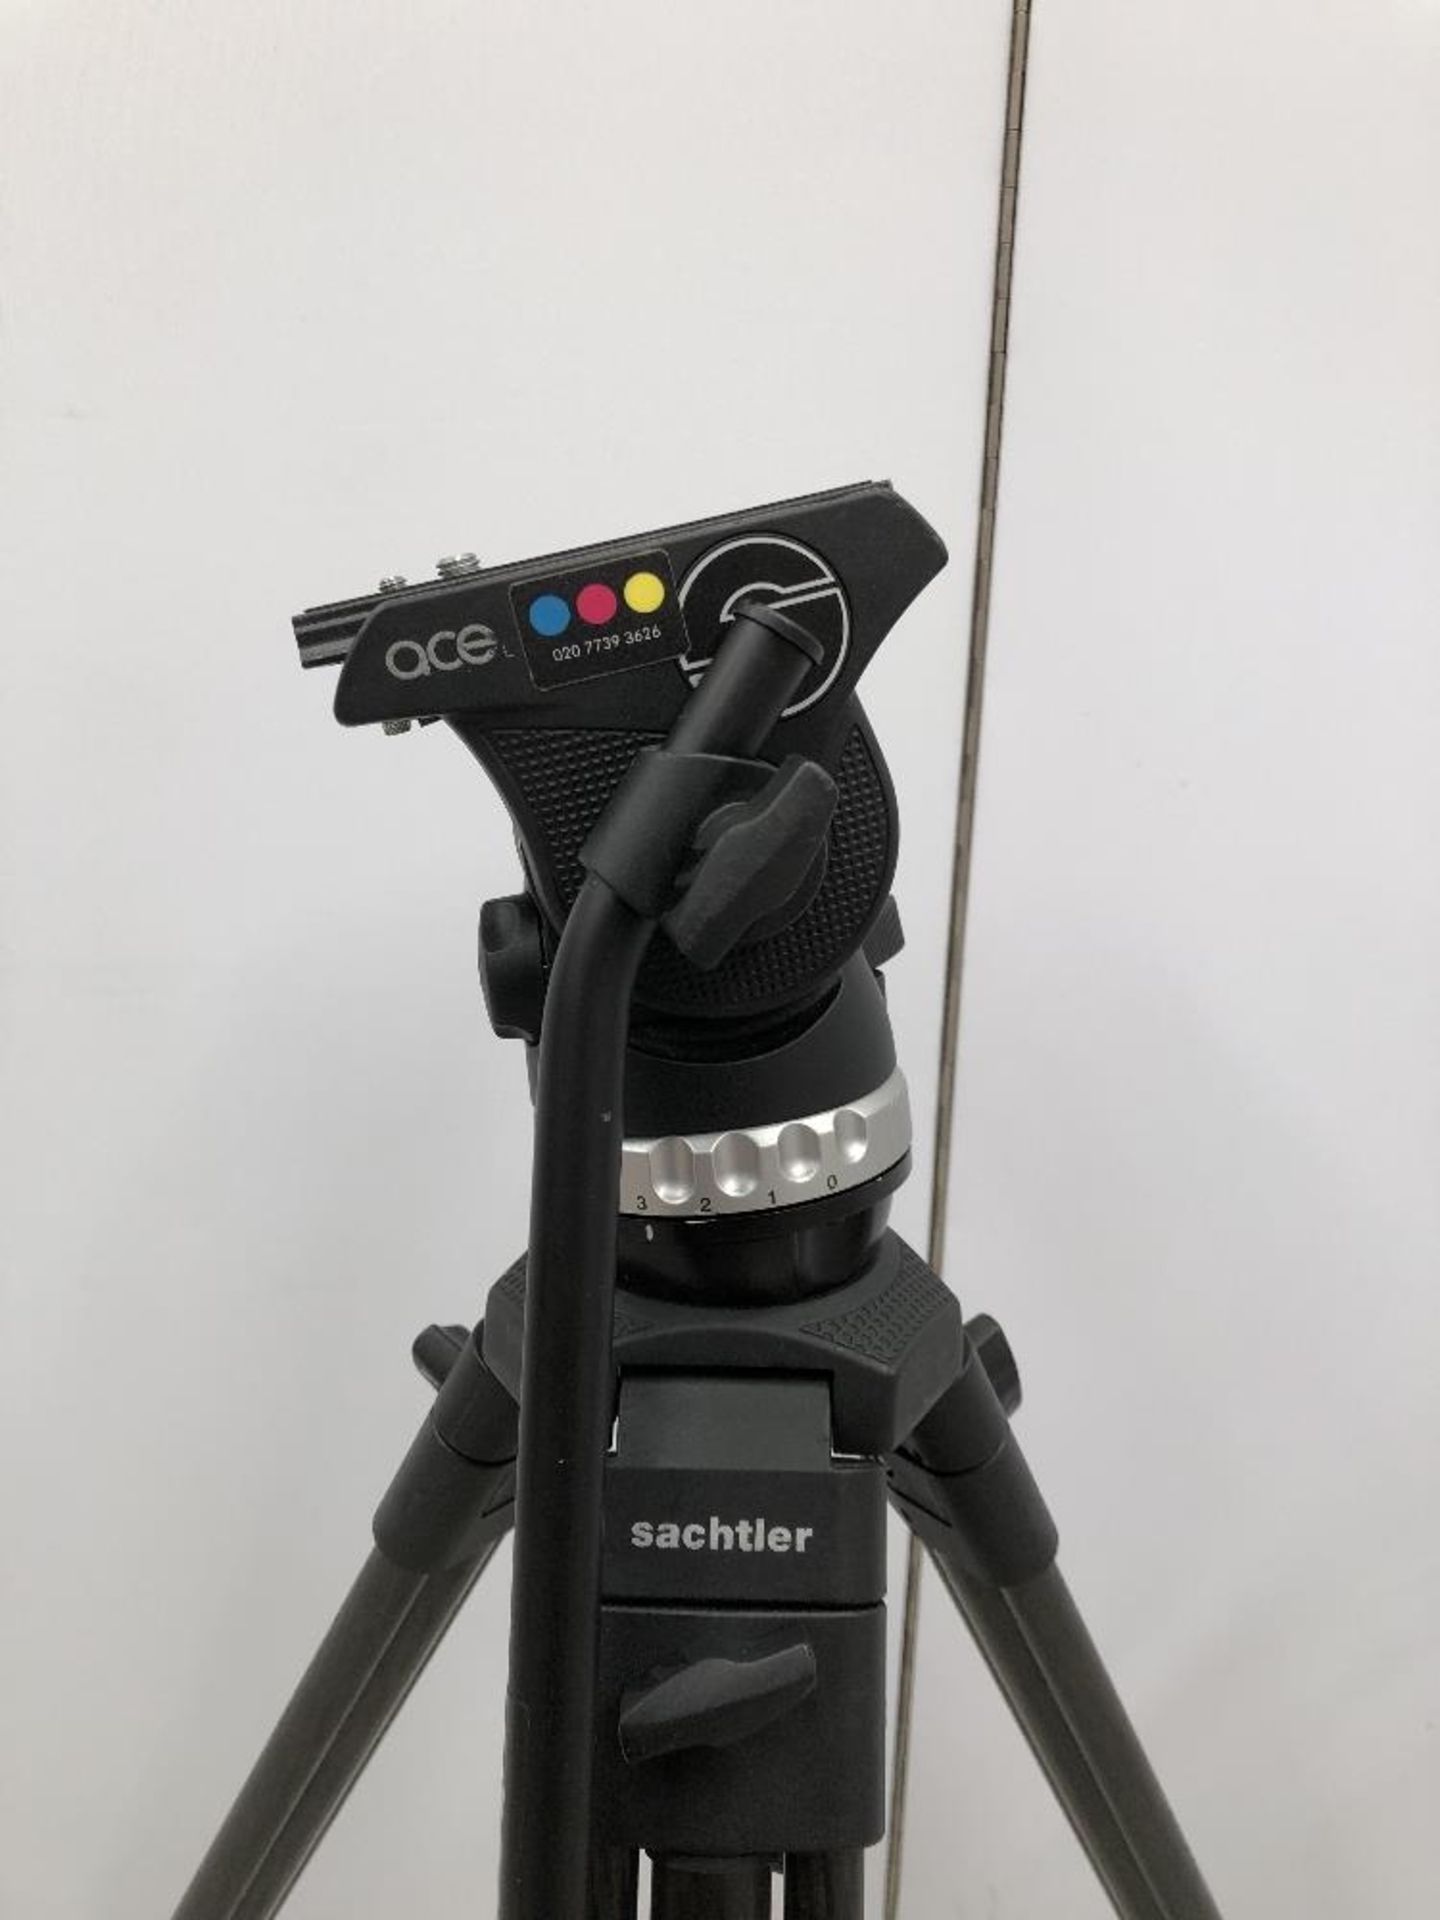 Sachtler Ace M Telescopic Tripod With Fluid head And Carry Bag - Image 2 of 6